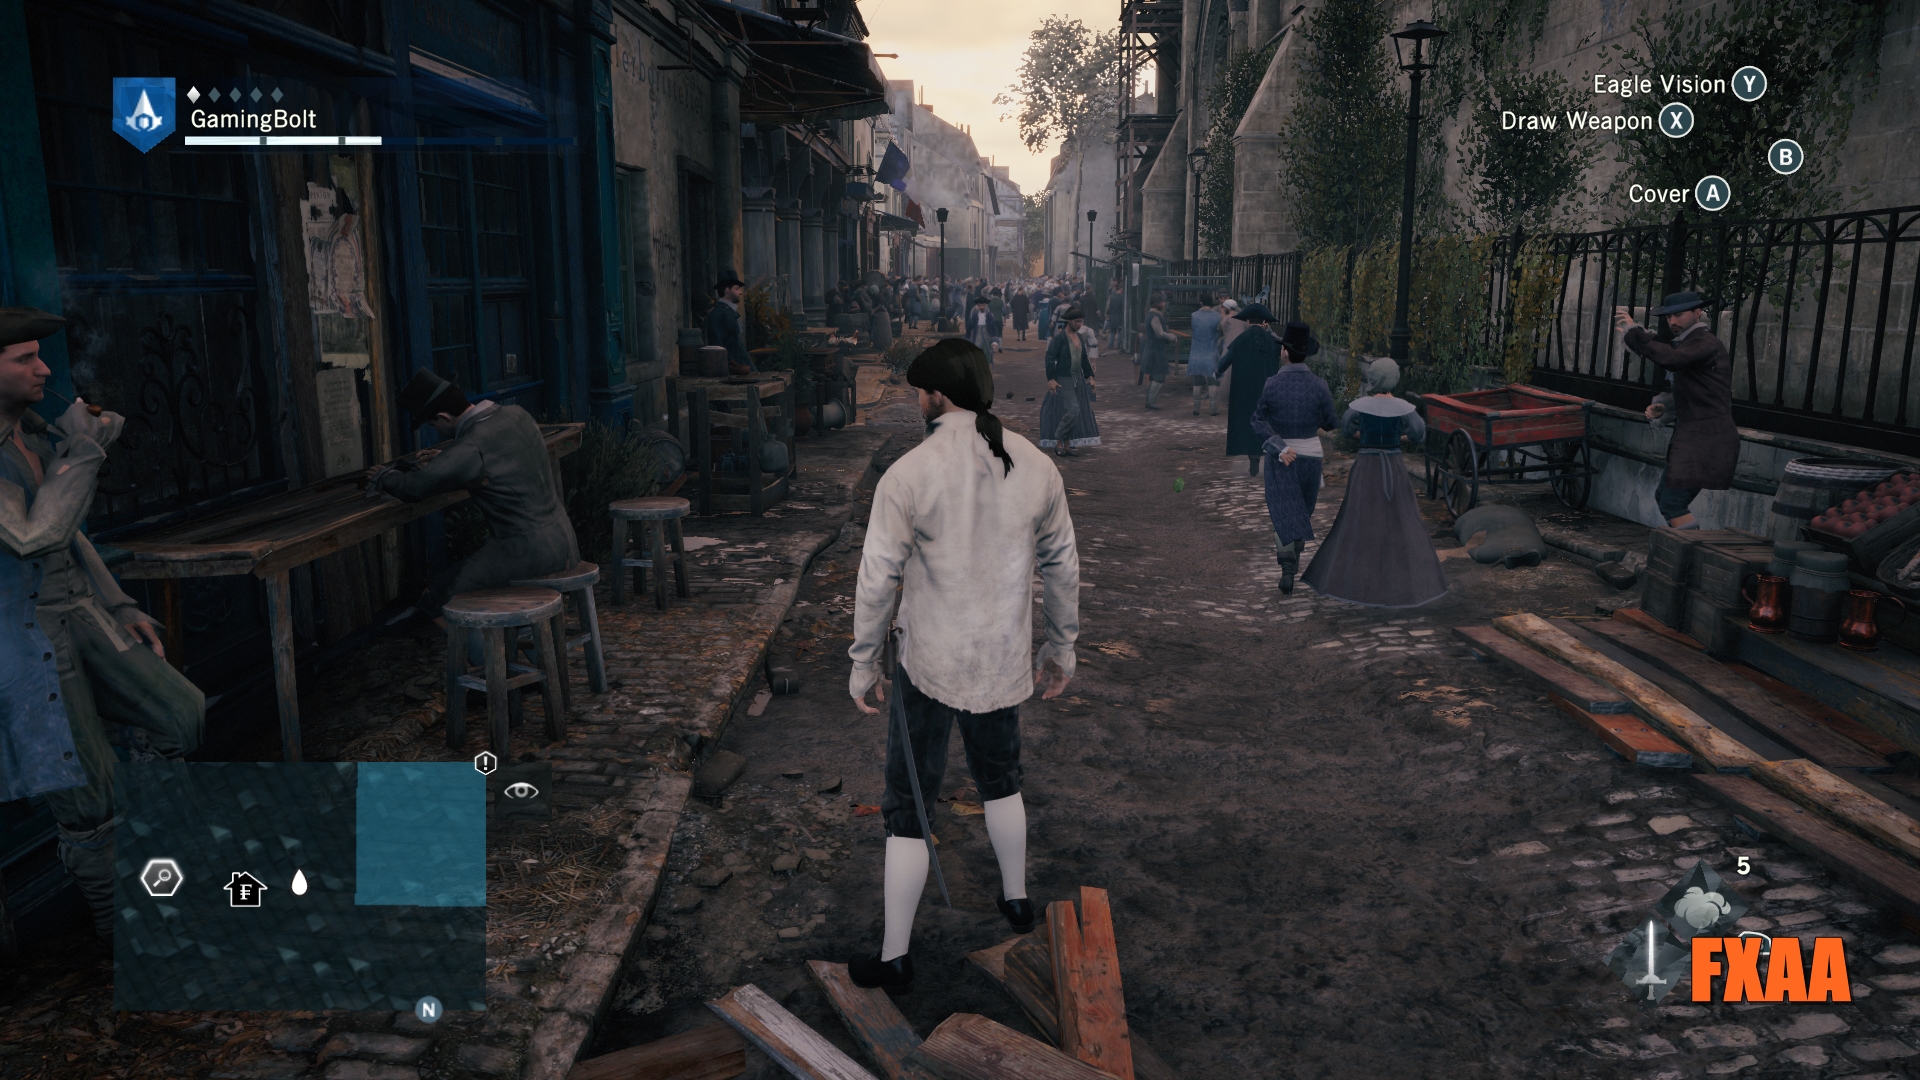  Assassins Creed Unity (PS4) : Video Games